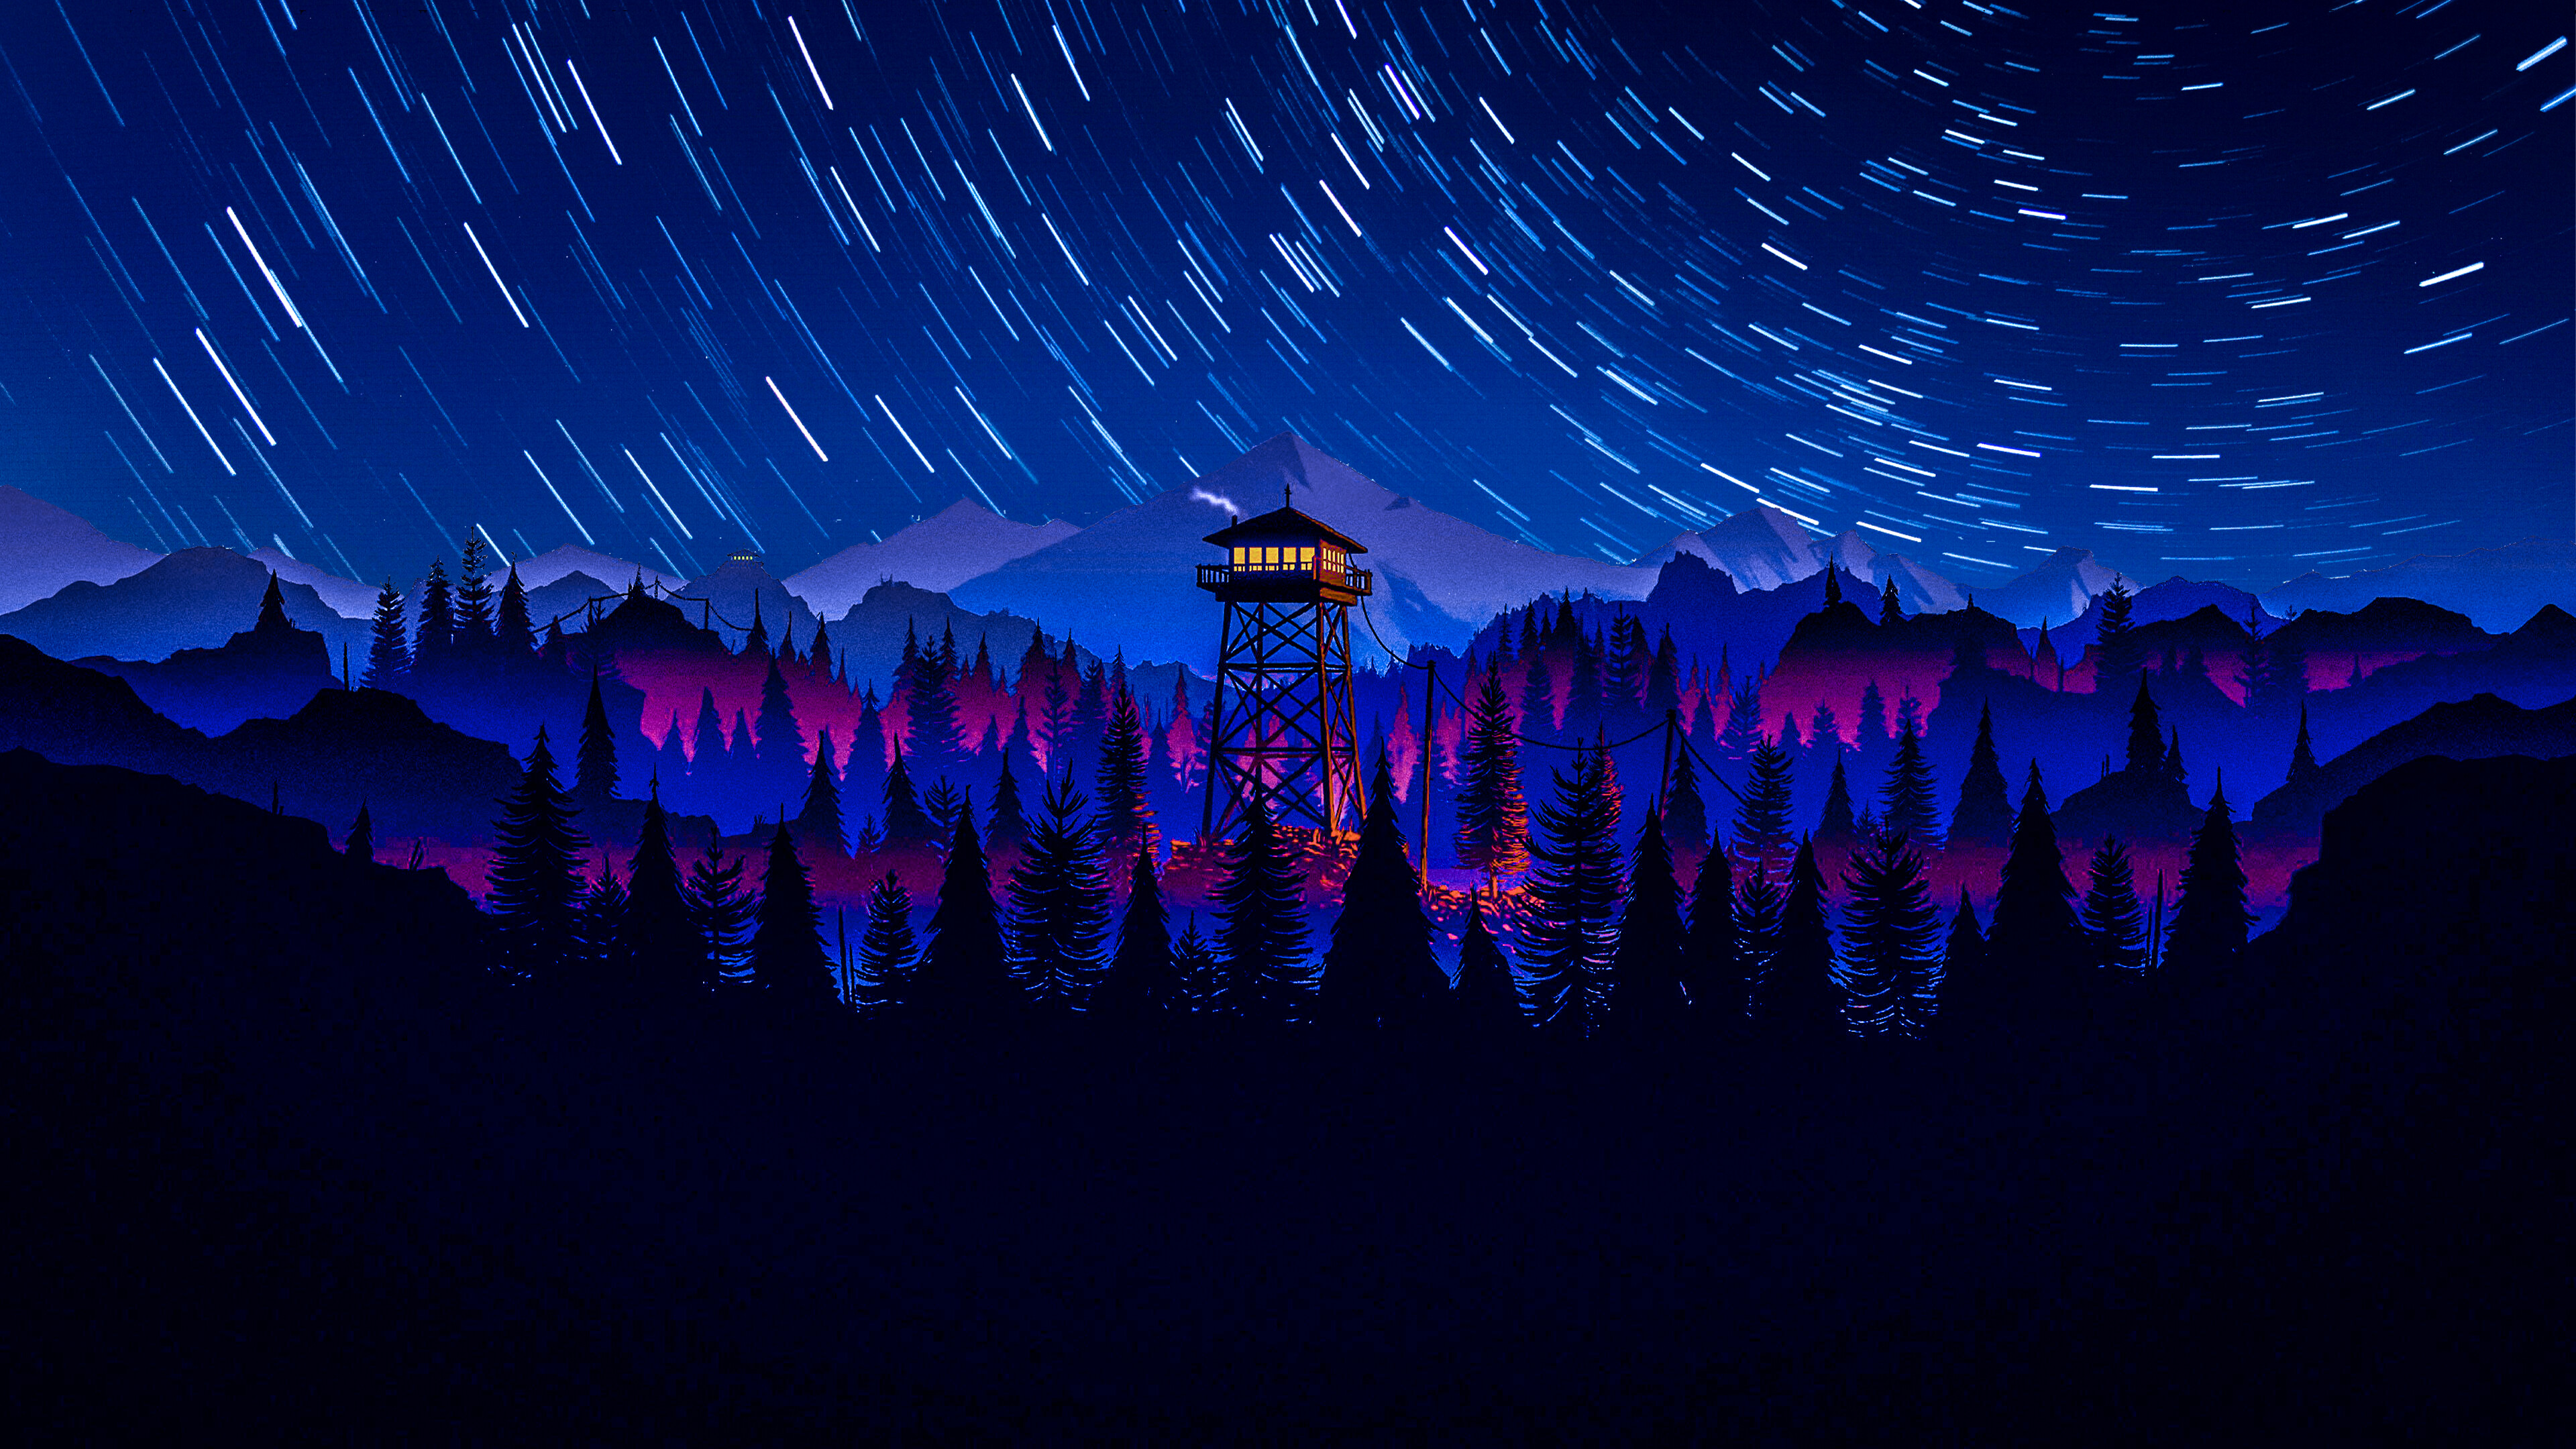 Firewatch: The game was released in February 2016 for Microsoft Windows, OS X, Linux, and PlayStation 4, for Xbox One in September 2016, and for Nintendo Switch in December 2018. 3840x2160 4K Wallpaper.